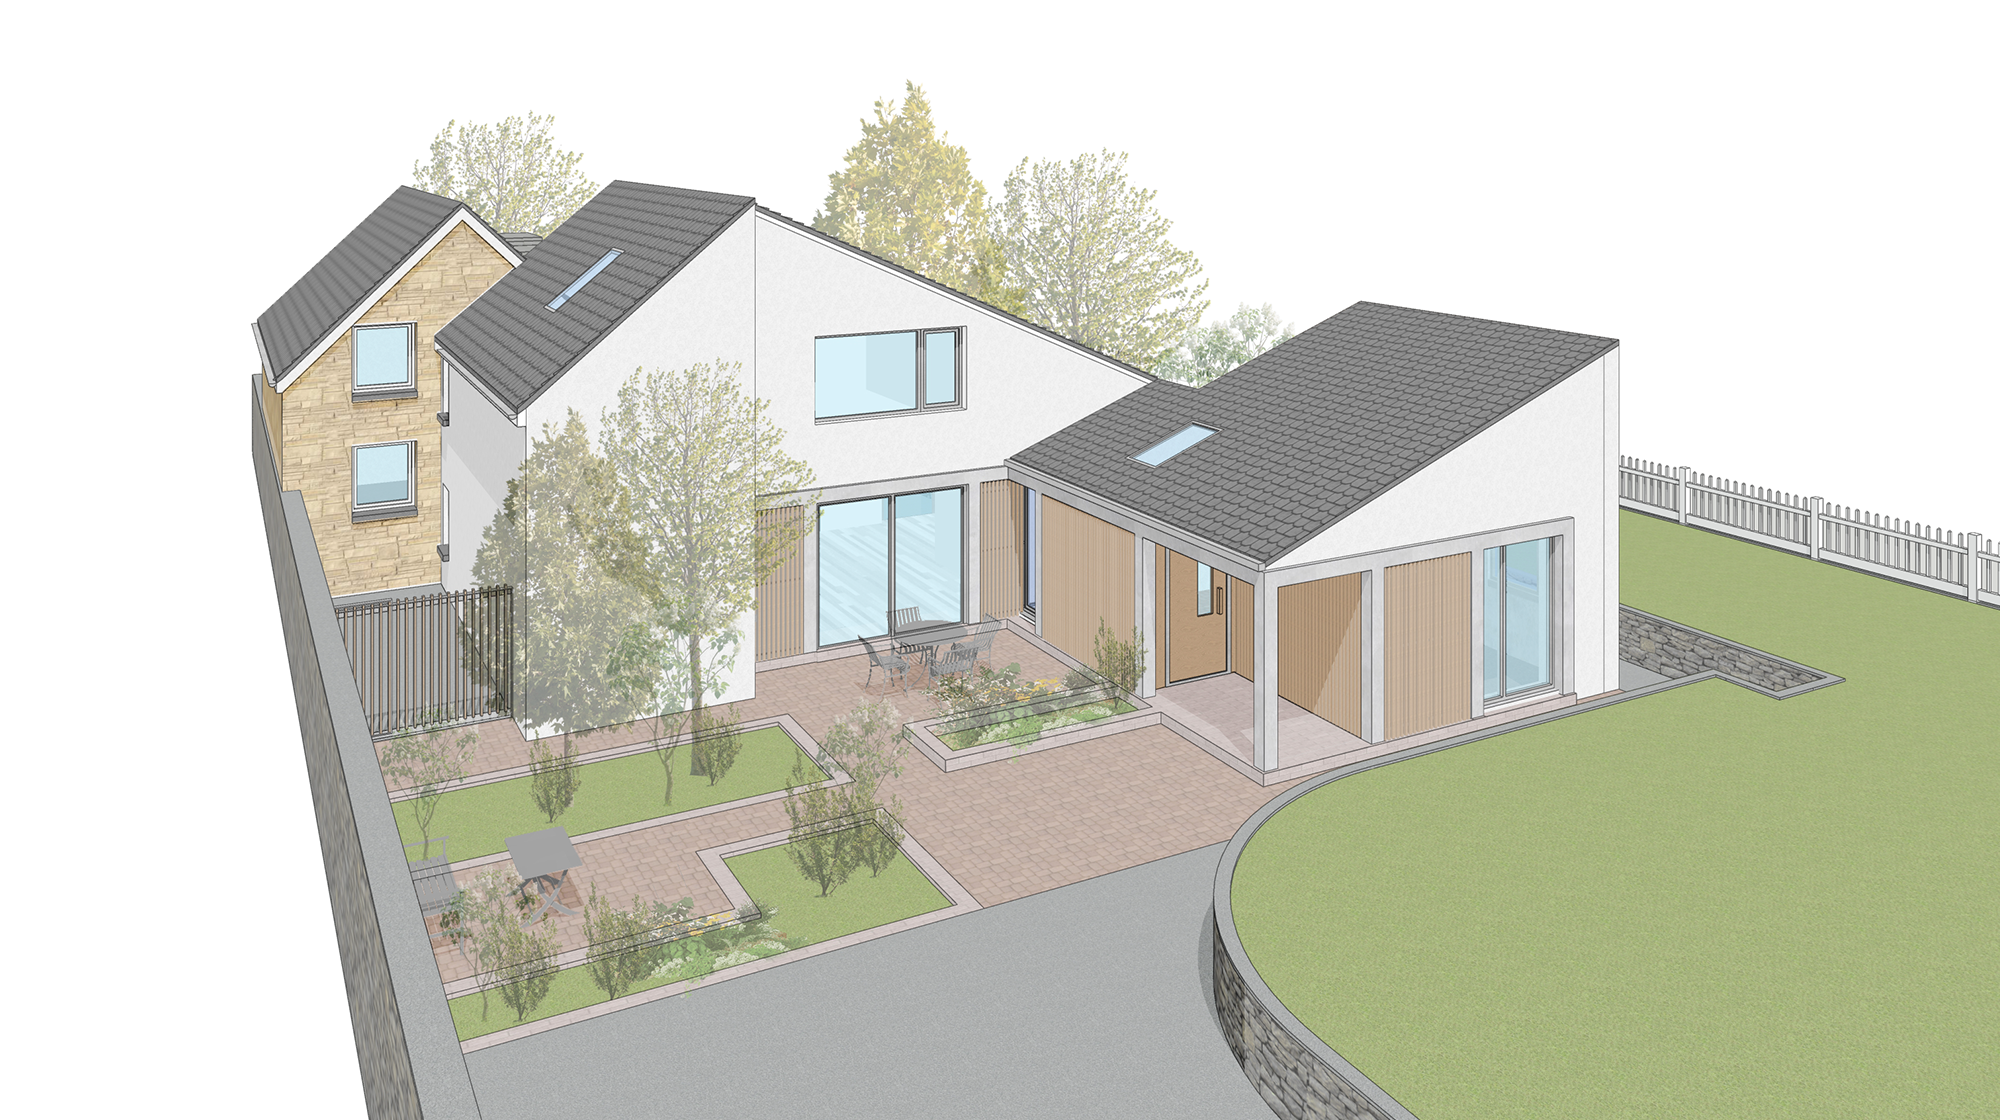 Planning Approval Received!, 